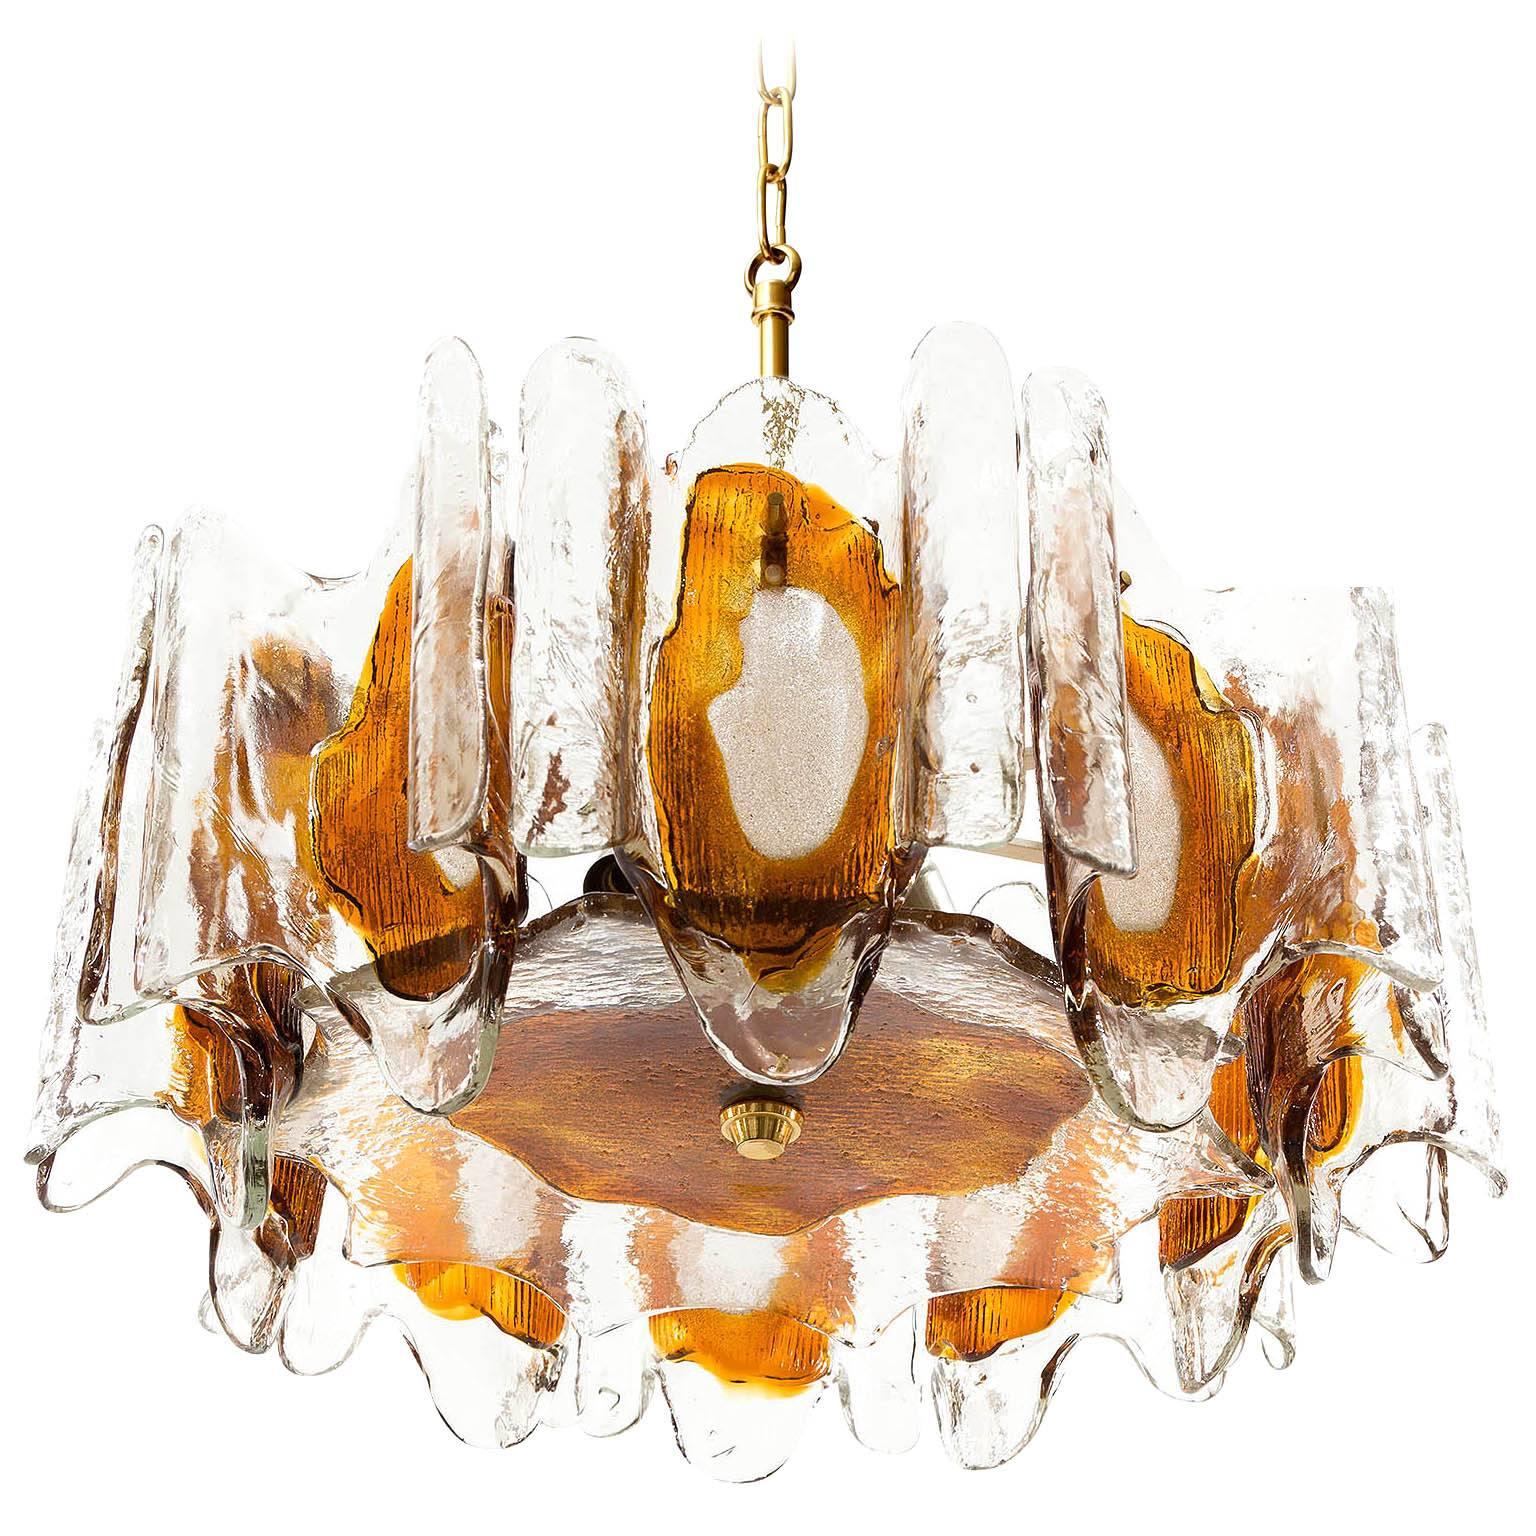 A beautiful pendant chandelier made of melted orange / amber tone Murano glass by Kalmar, manufactured in midcentury, circa 1970 (late 1960s or early 1970s).
The light fixture has five sockets for small screw base bulbs or LEDs.
The lights can be